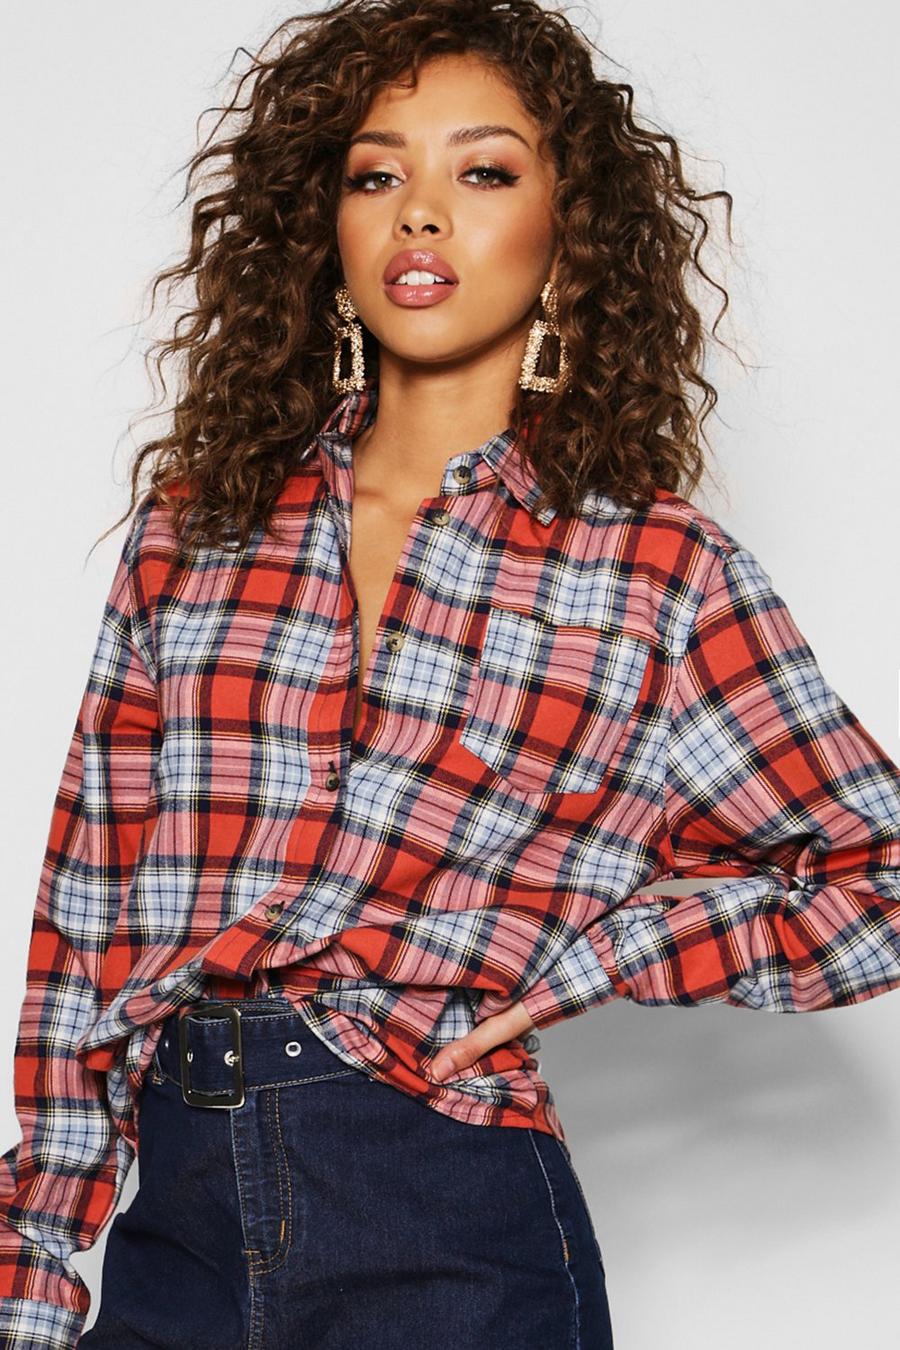 How to Style an Oversized Flannel Shirt